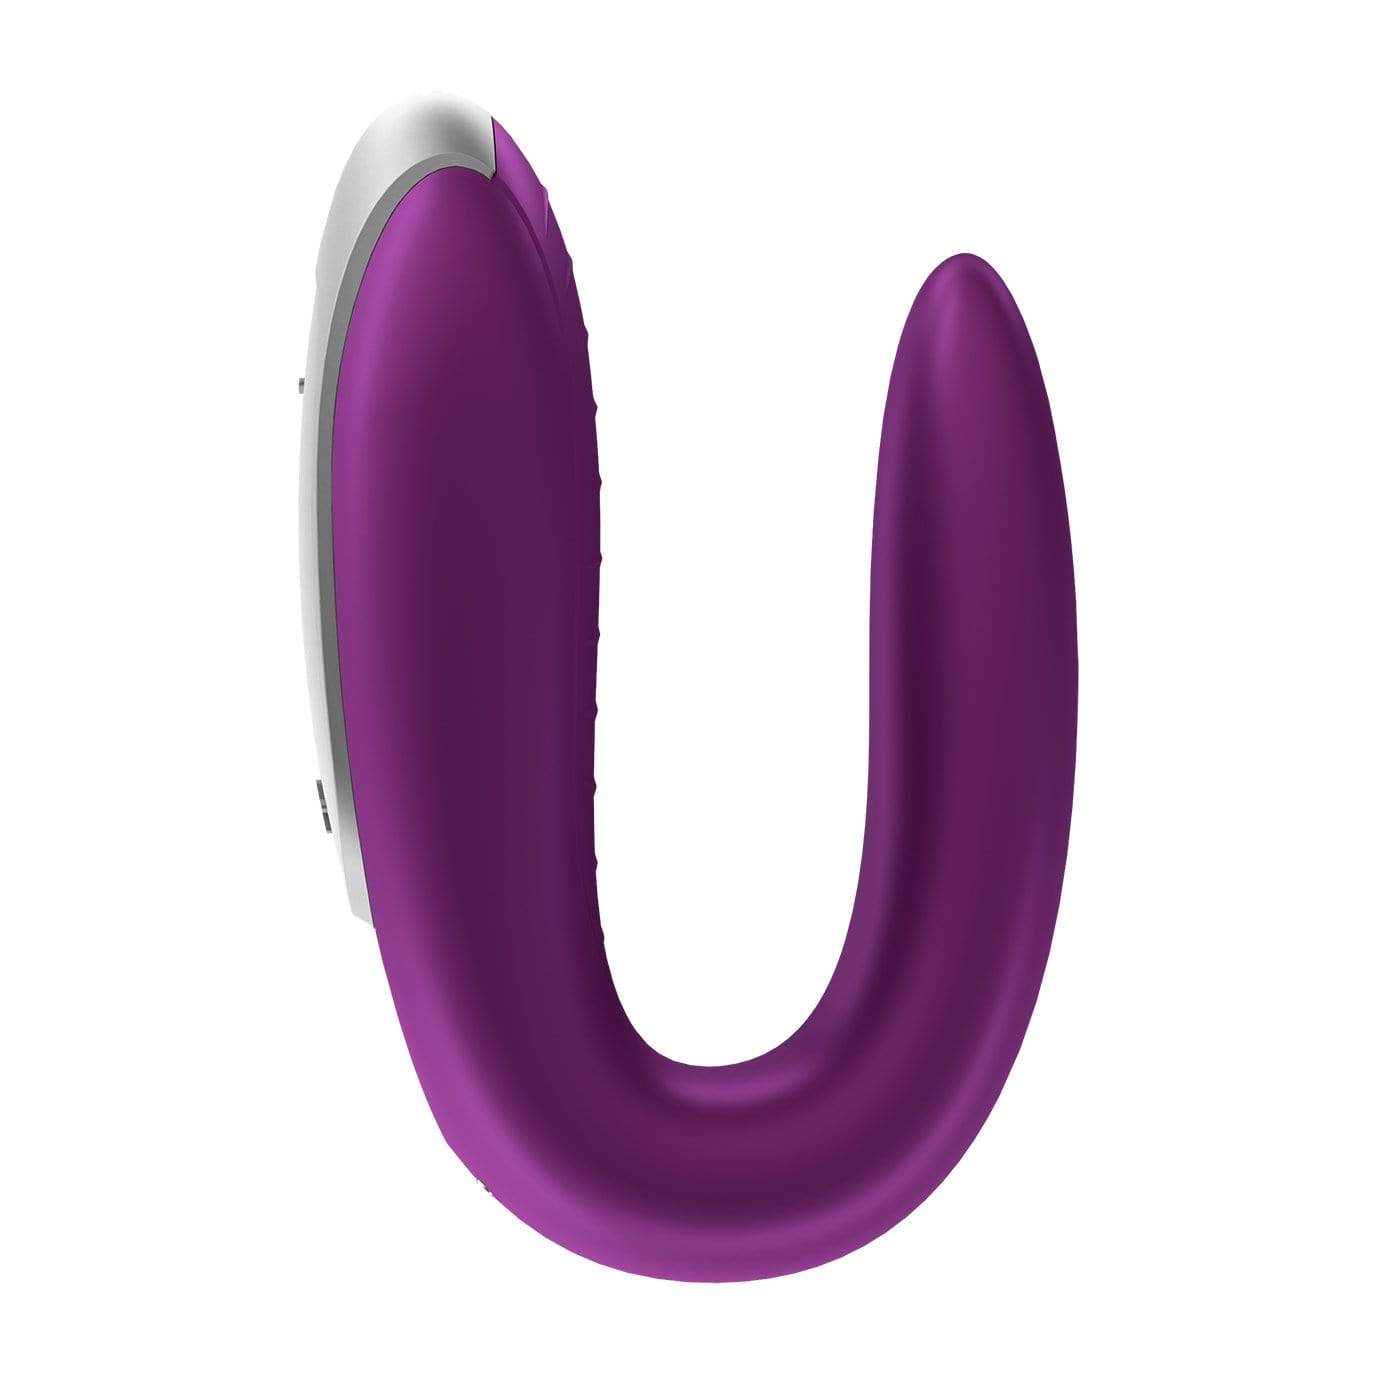 Satisfyer - Double Fun App-Controlled Couple's Vibrator with Remote Control (Purple) Remote Control Couple's Massager (Vibration) Rechargeable 4061504002460 CherryAffairs